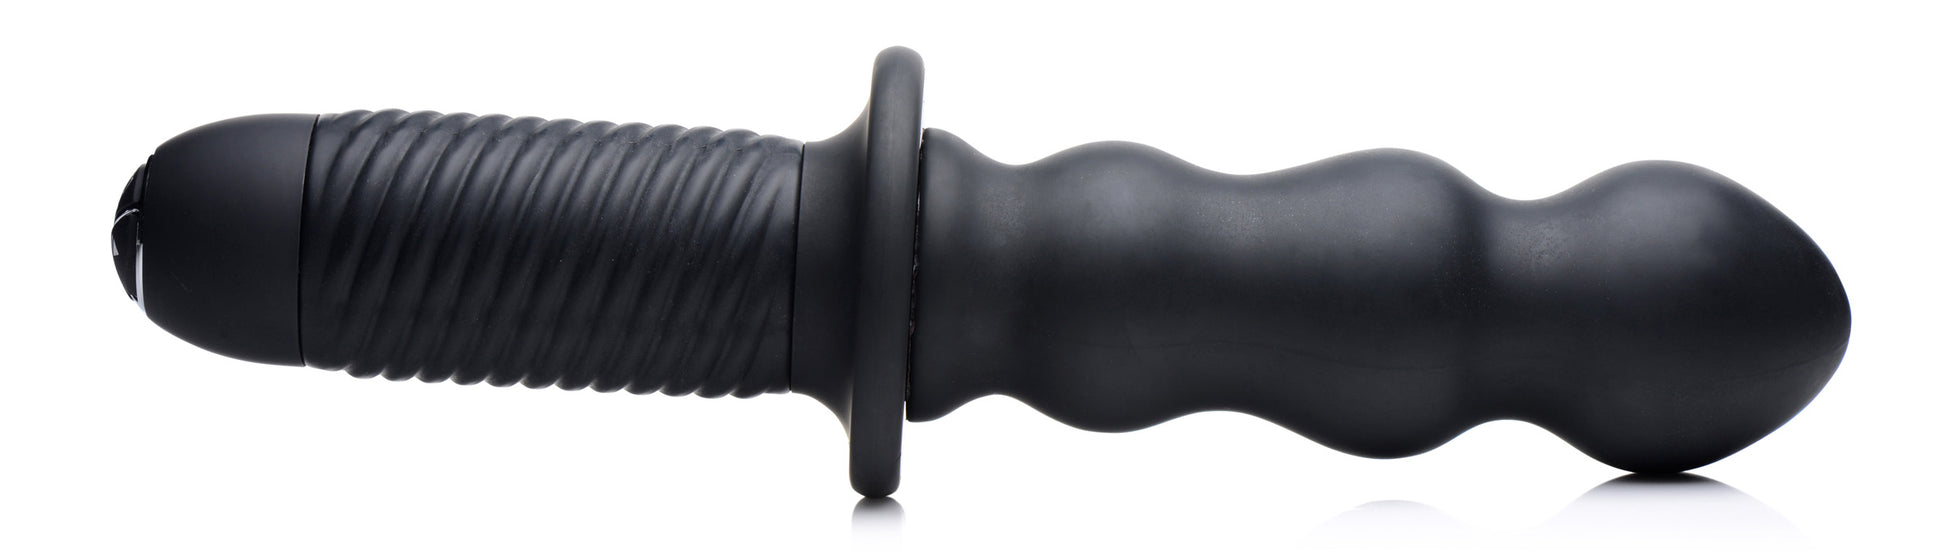 The Groove 10X Silicone Vibrator with Handle - UABDSM